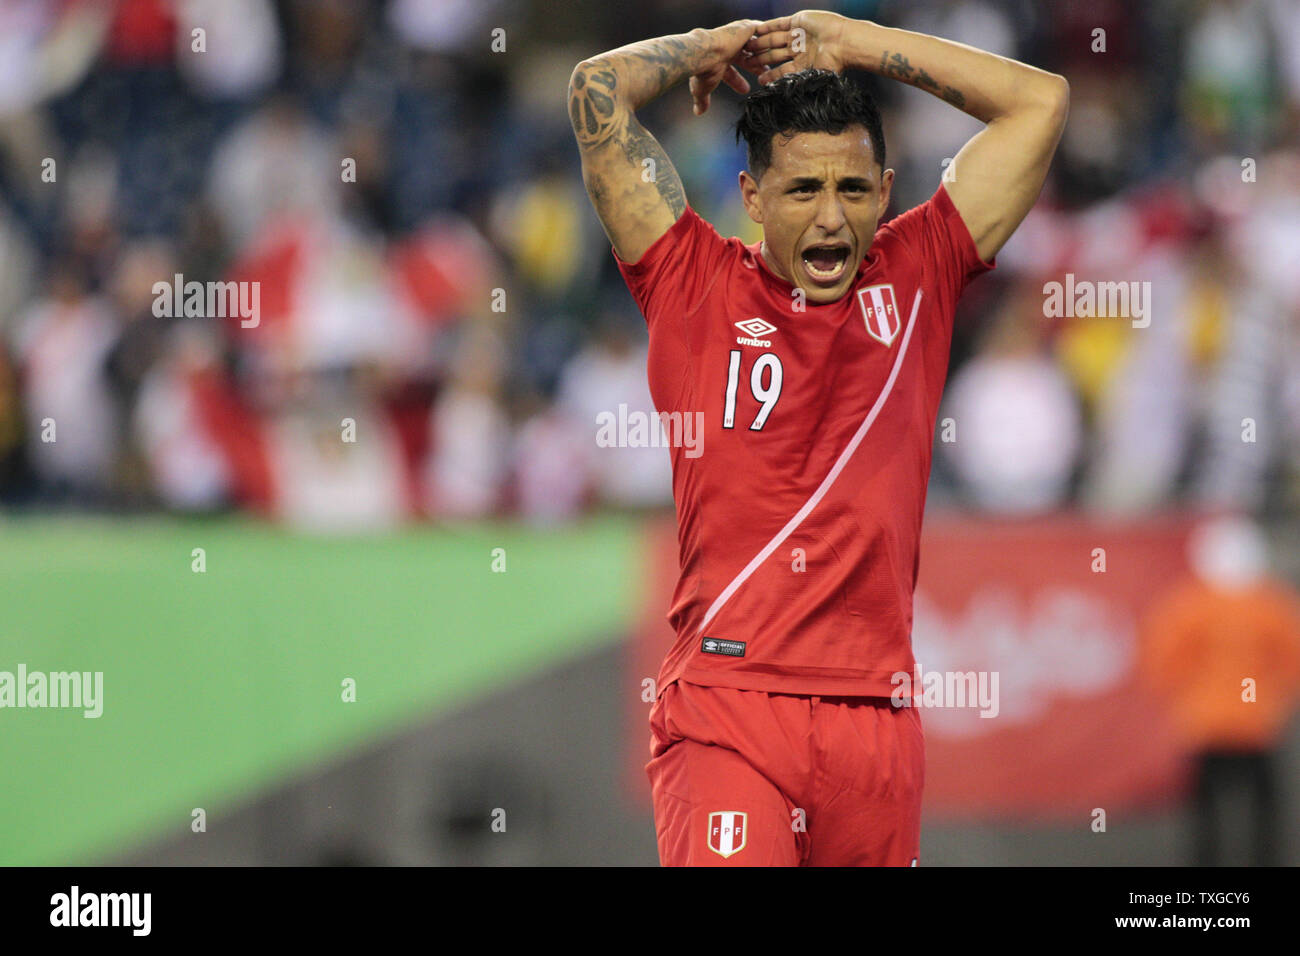 Peru midfielder Victor Yotun (19) yells to fans after the team defeated Brazil in the 2016 Copa America Centenario Group B match at Gillette Stadium in Foxborough, Massachusetts on June 12, 2016.   Photo by Matthew Healey/UPI Stock Photo